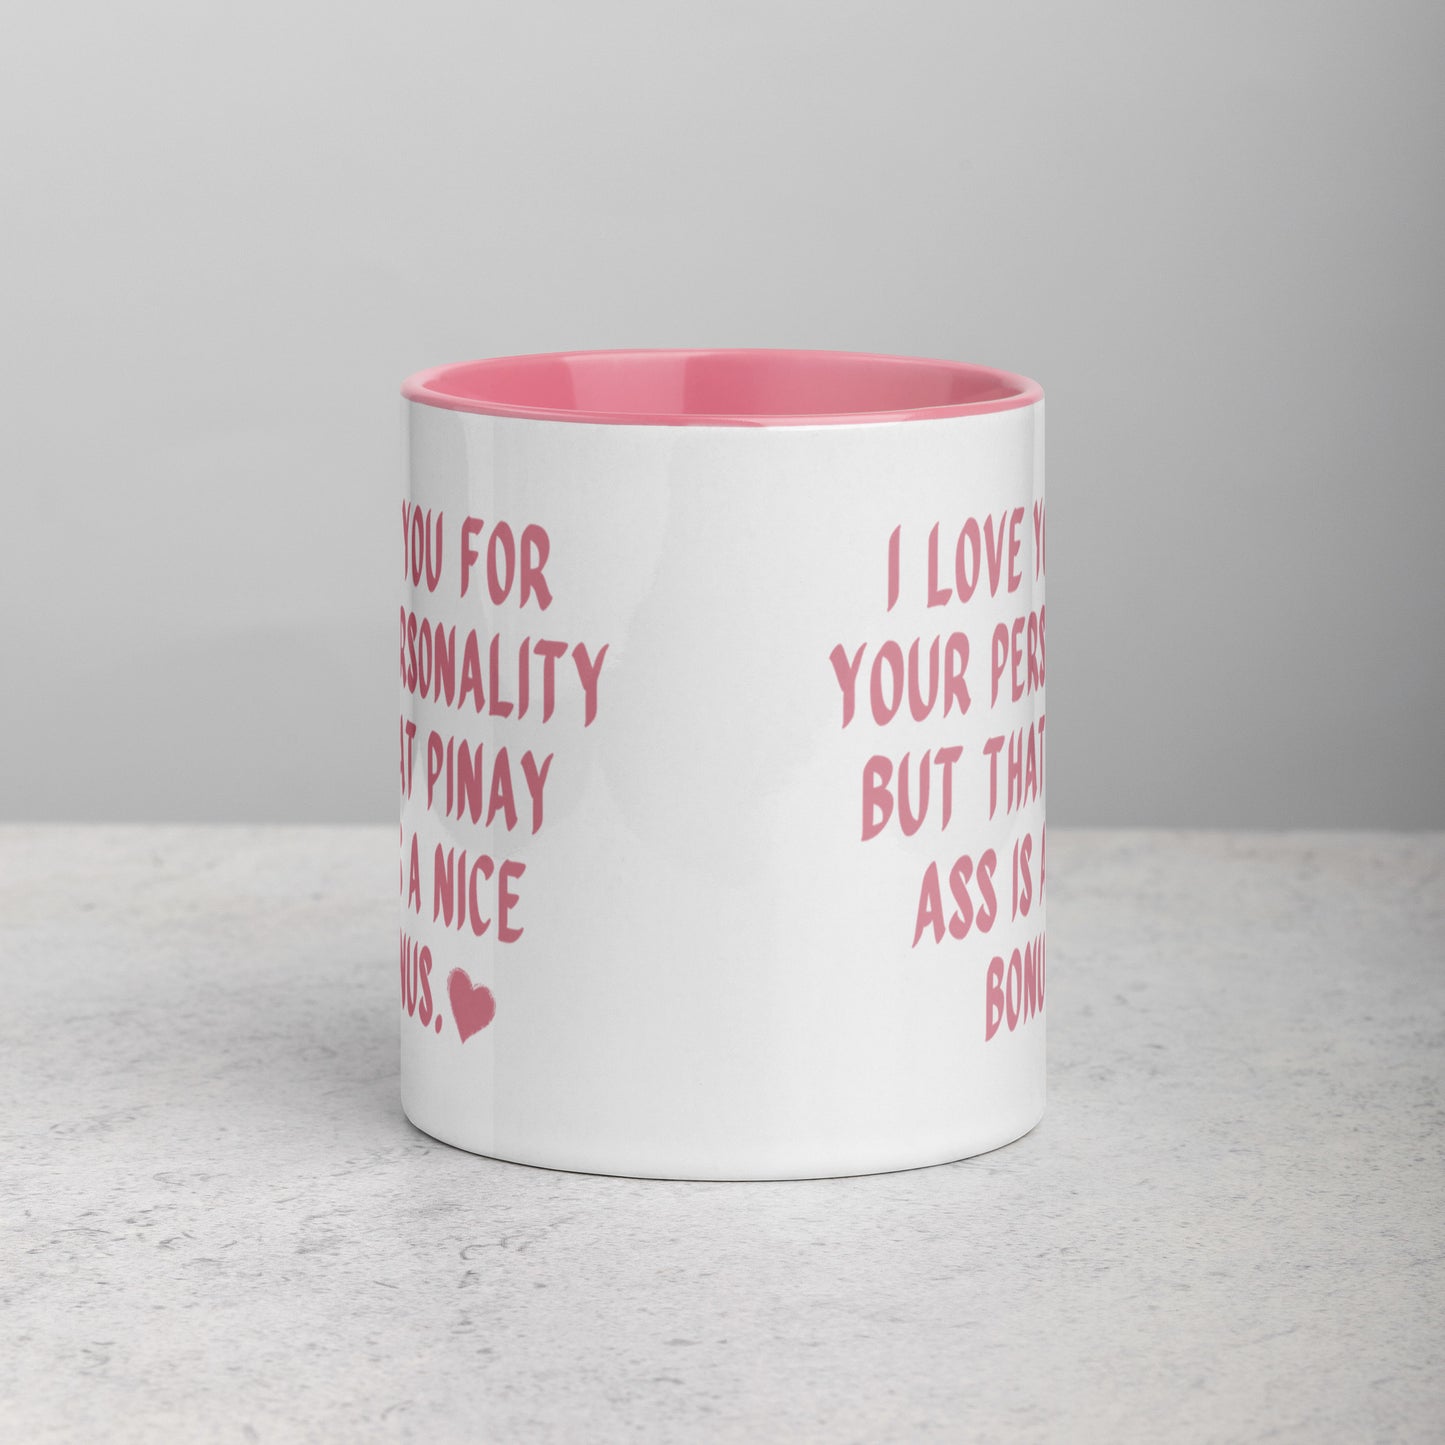 Front view of the I Love You For Your Personality Funny Pinay Valentine's Day Mug.